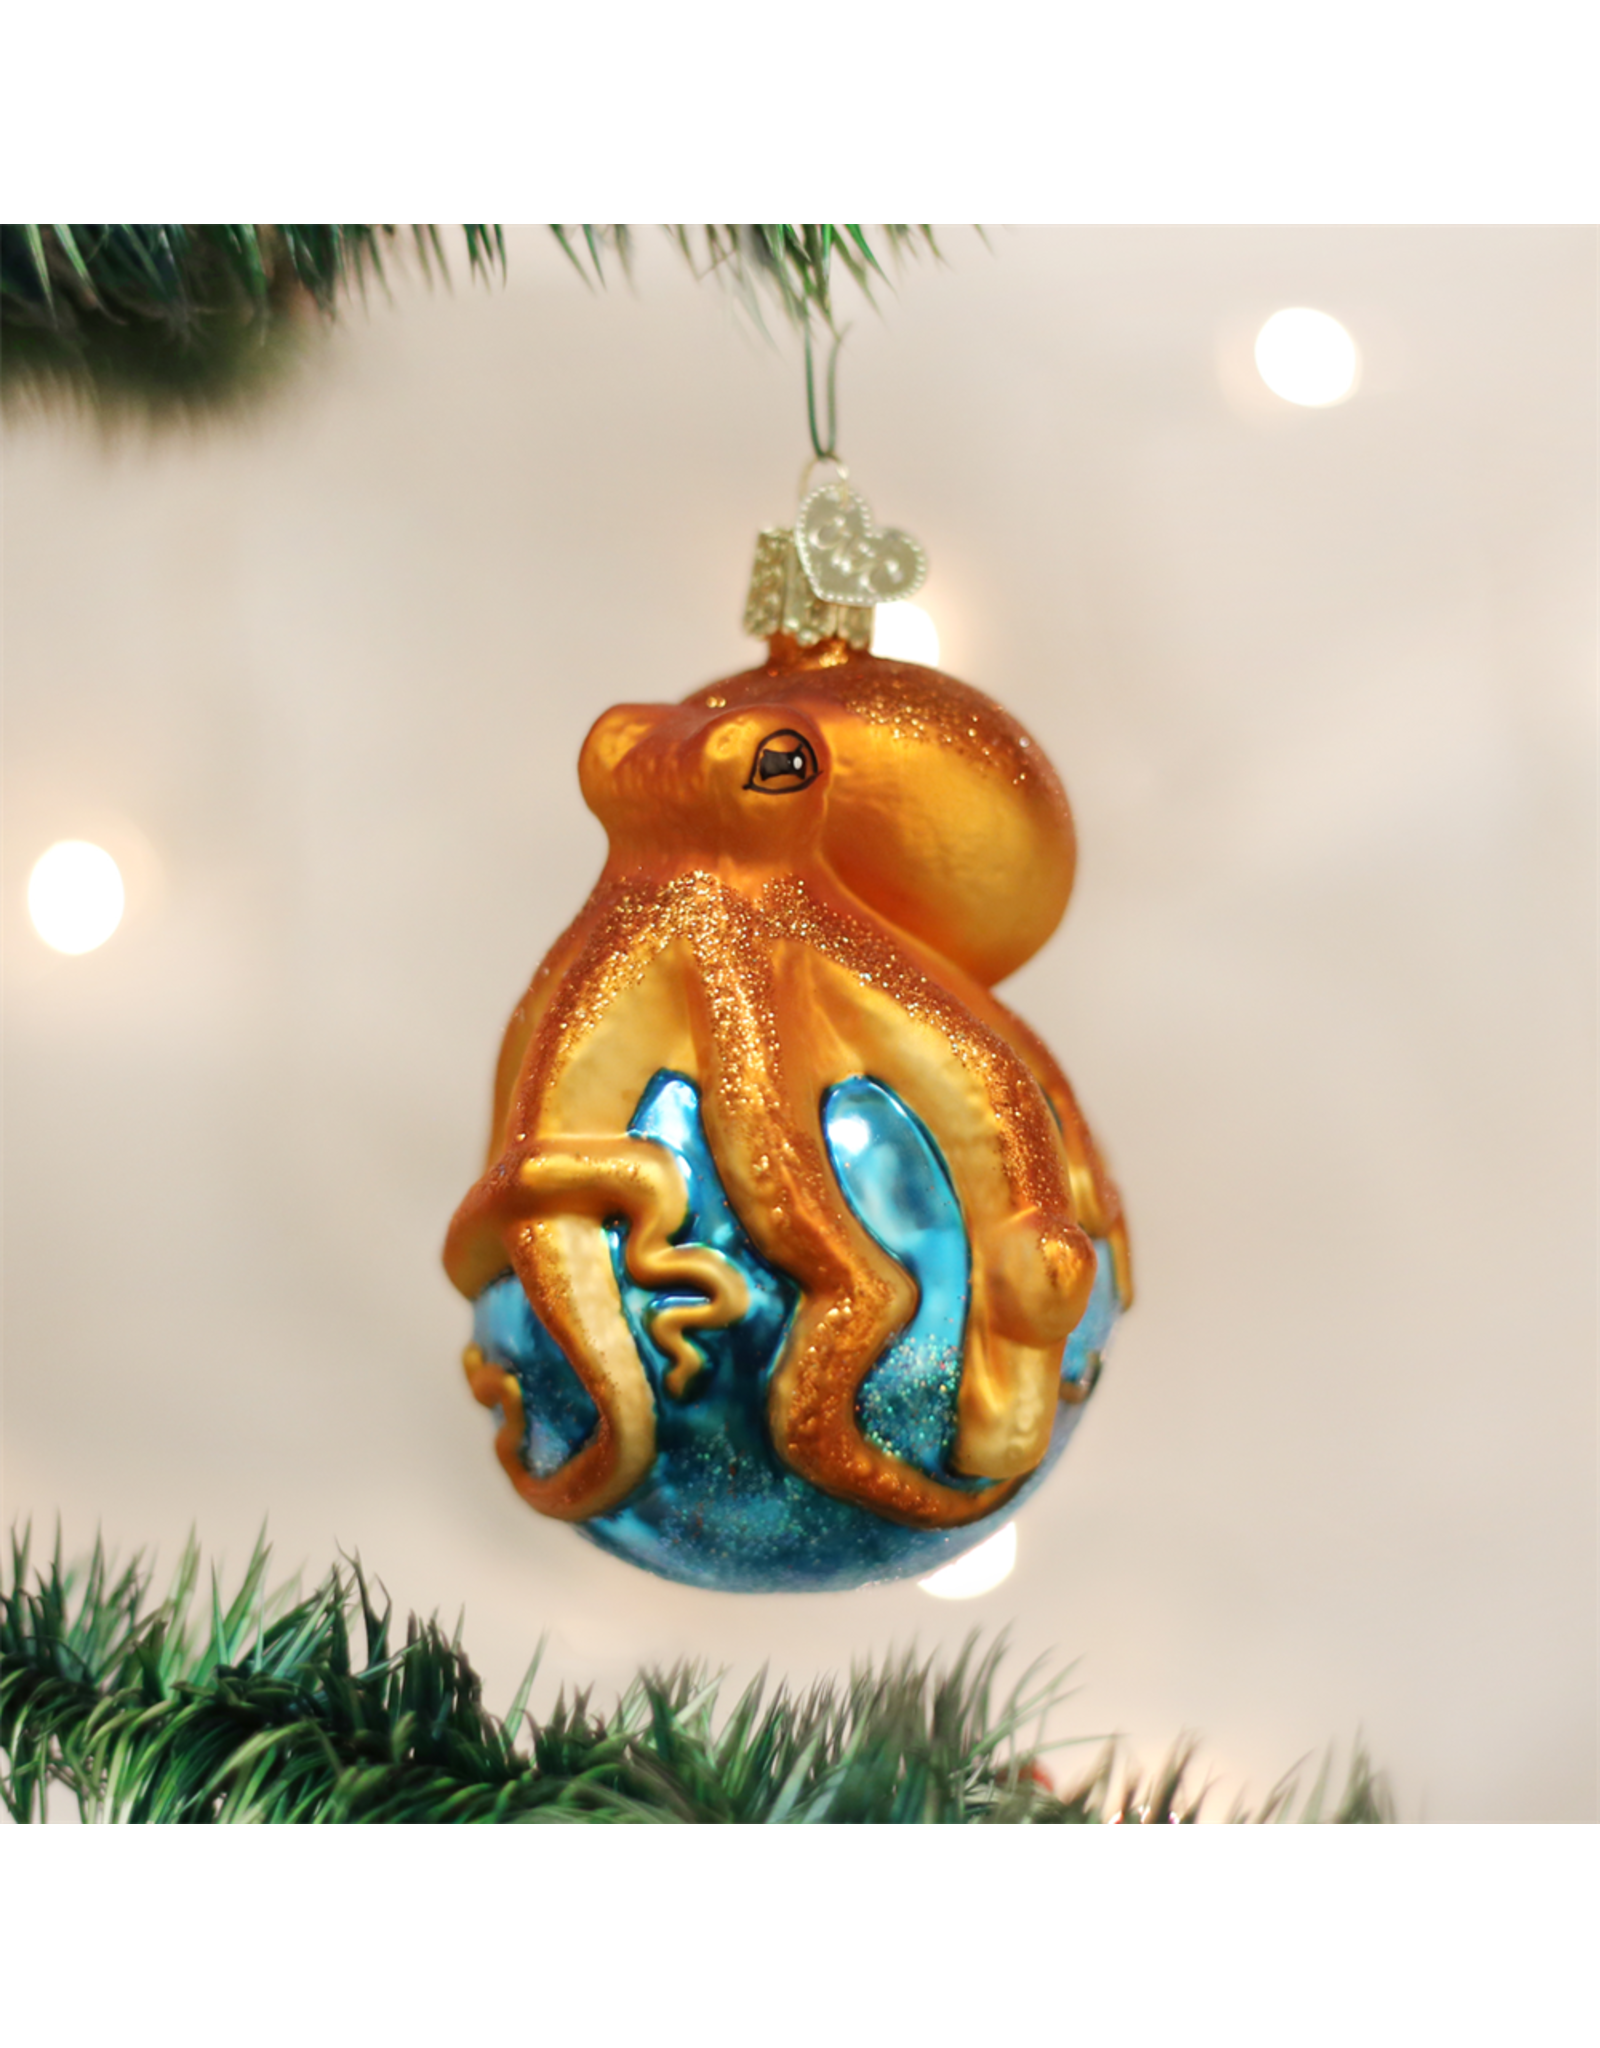 Old World Christmas Octopus Ornament